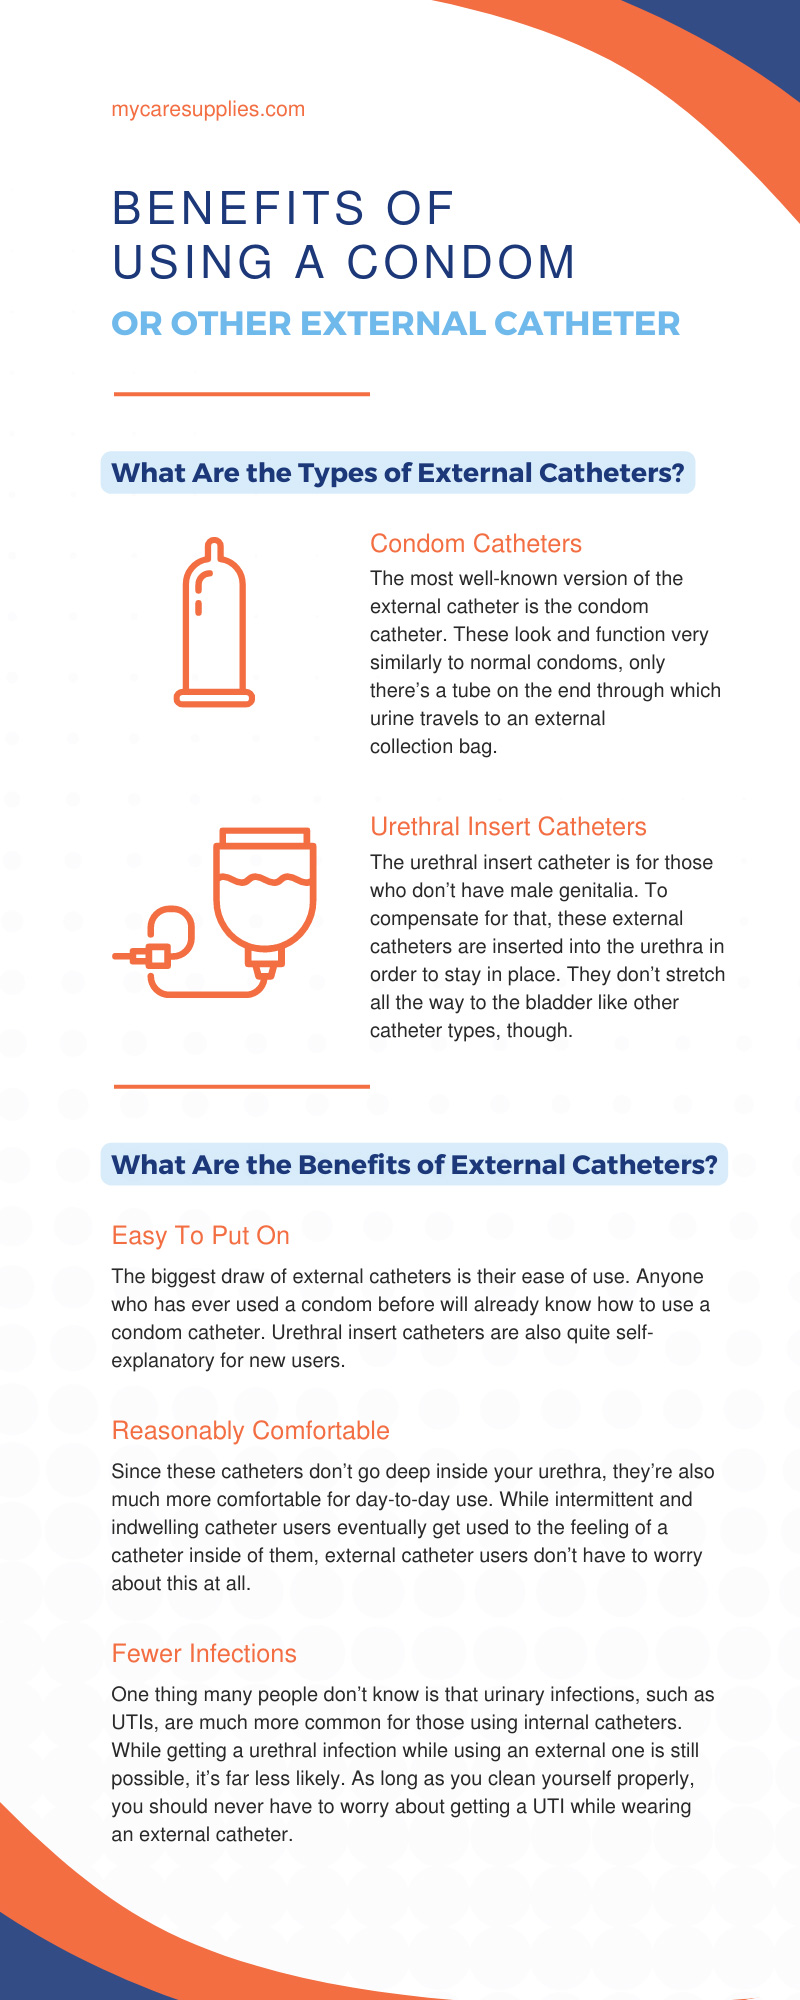 Benefits of Using a Condom or Other External Catheter